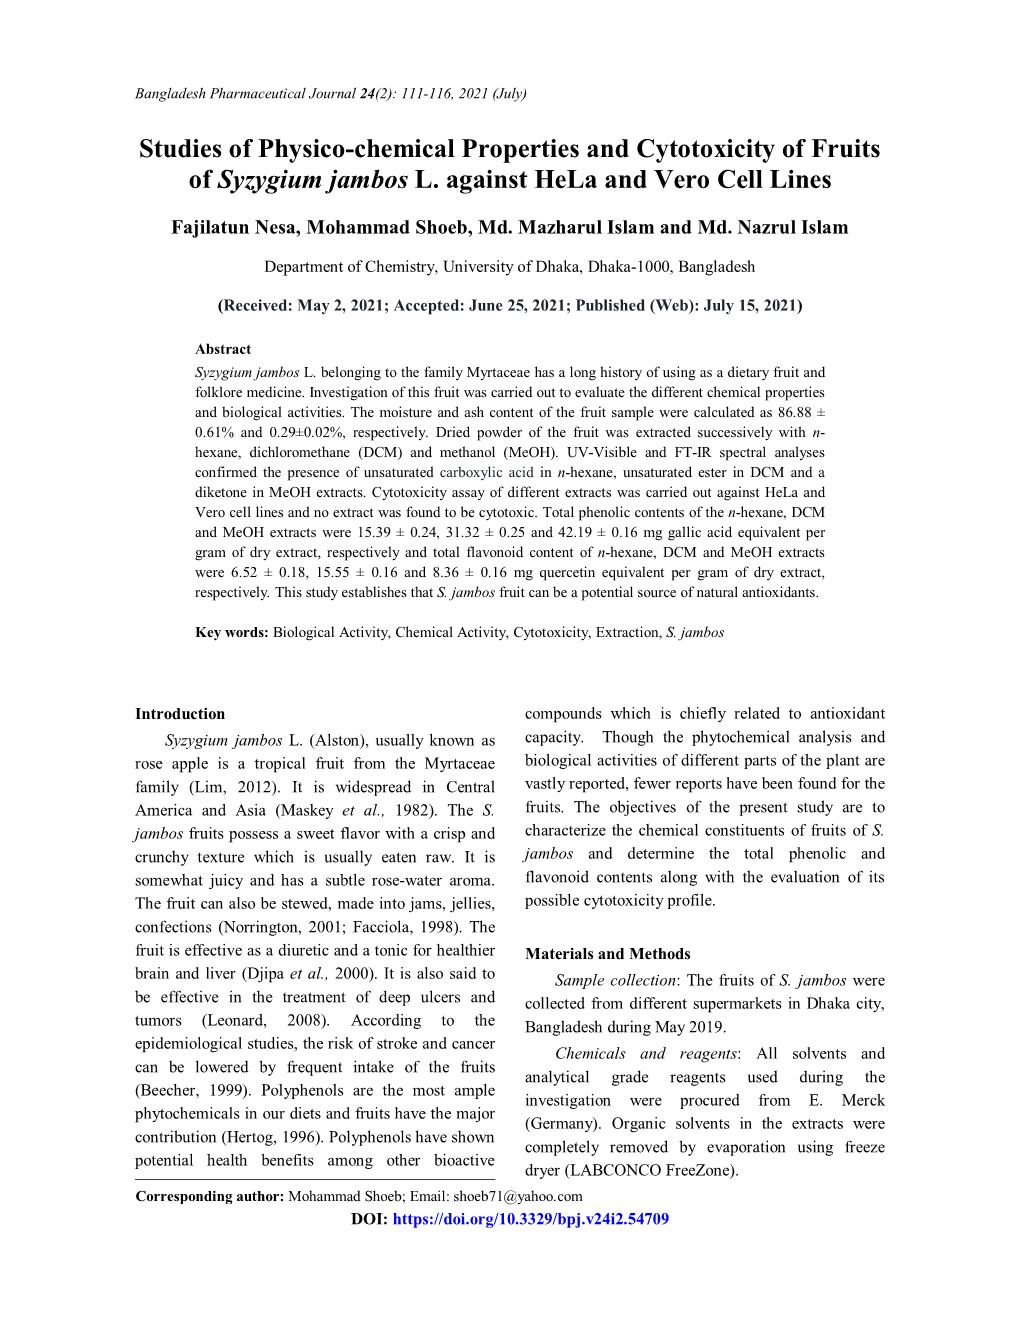 Studies of Physico-Chemical Properties and Cytotoxicity of Fruits of Syzygium Jambos L. Against Hela and Vero Cell Lines